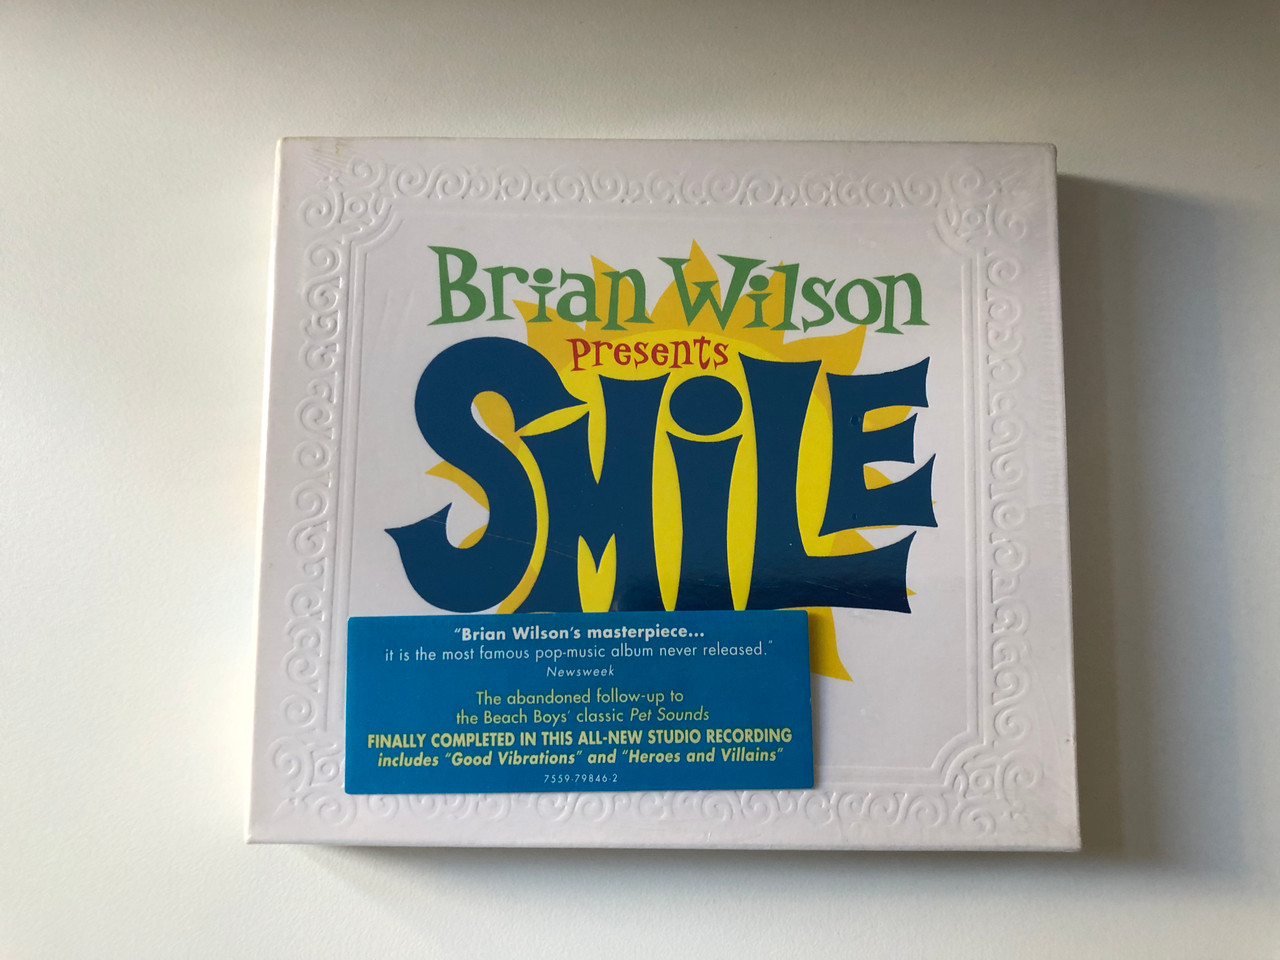 https://cdn10.bigcommerce.com/s-62bdpkt7pb/products/0/images/200815/Brian_Wilson_Presents_-_Smile_Finally_Completed_In_This_All-New_Studio_Recording_includes_Good_Vibraions_and_Heroes_and_Villians_Nonesuch_Audio_CD_7559-79846-2_1__01323.1638342771.1280.1280.JPG?c=2&_gl=1*1m3n20r*_ga*MjA2NTIxMjE2MC4xNTkwNTEyNTMy*_ga_WS2VZYPC6G*MTYzODM0MTY0MS4xOTcuMS4xNjM4MzQyMzc2LjE5